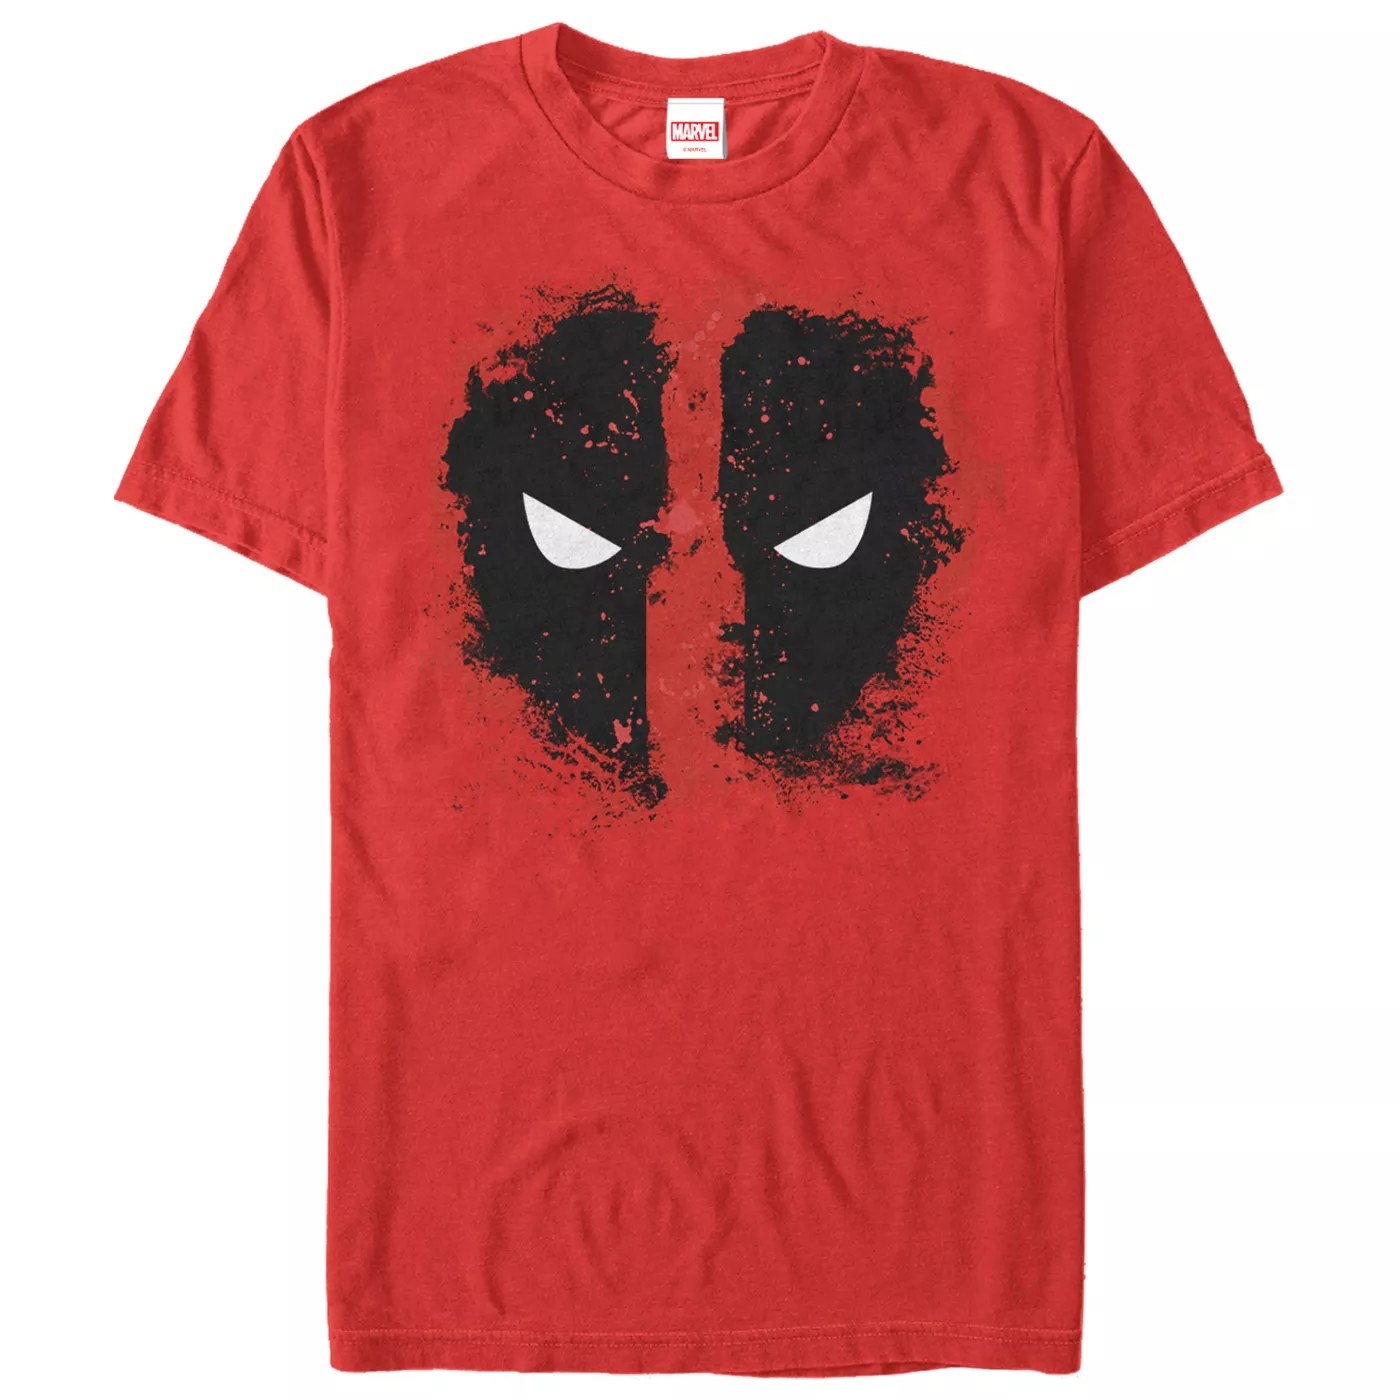 A red shirt with a reverse Deadpool mask in a splatter-paint style